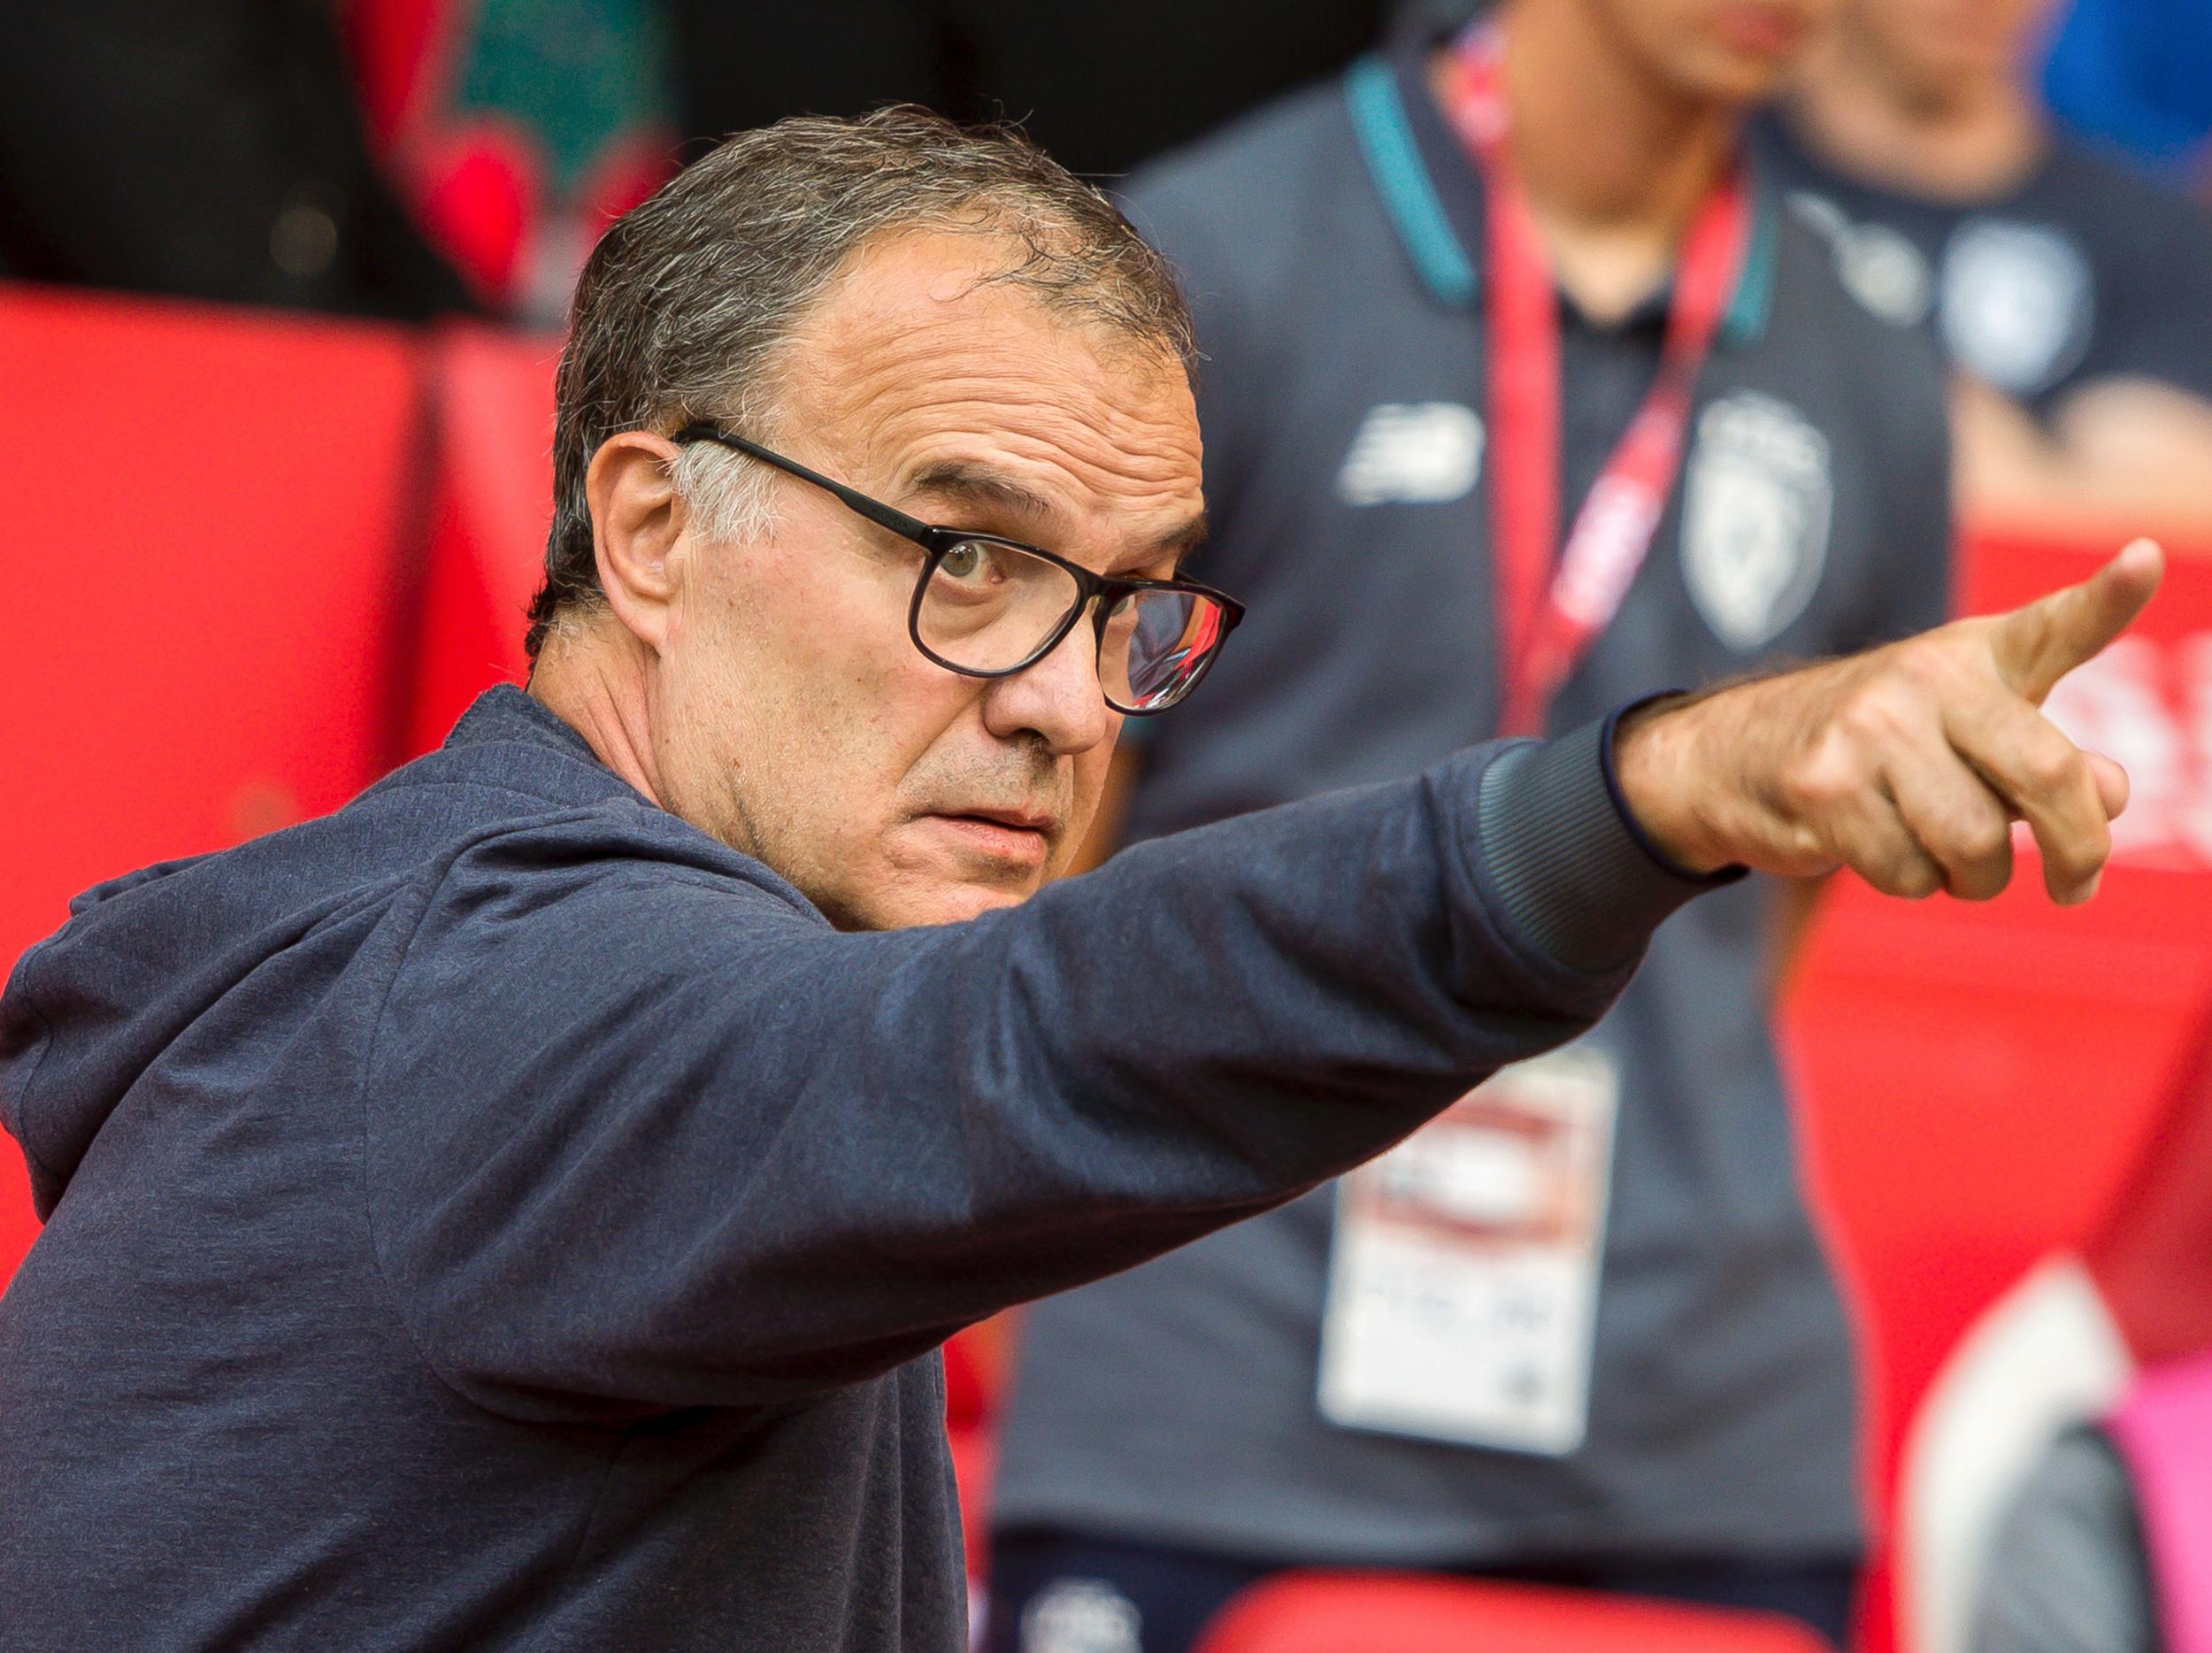 Bielsa joined Lille after an ill-fated two-day reign at Lazio